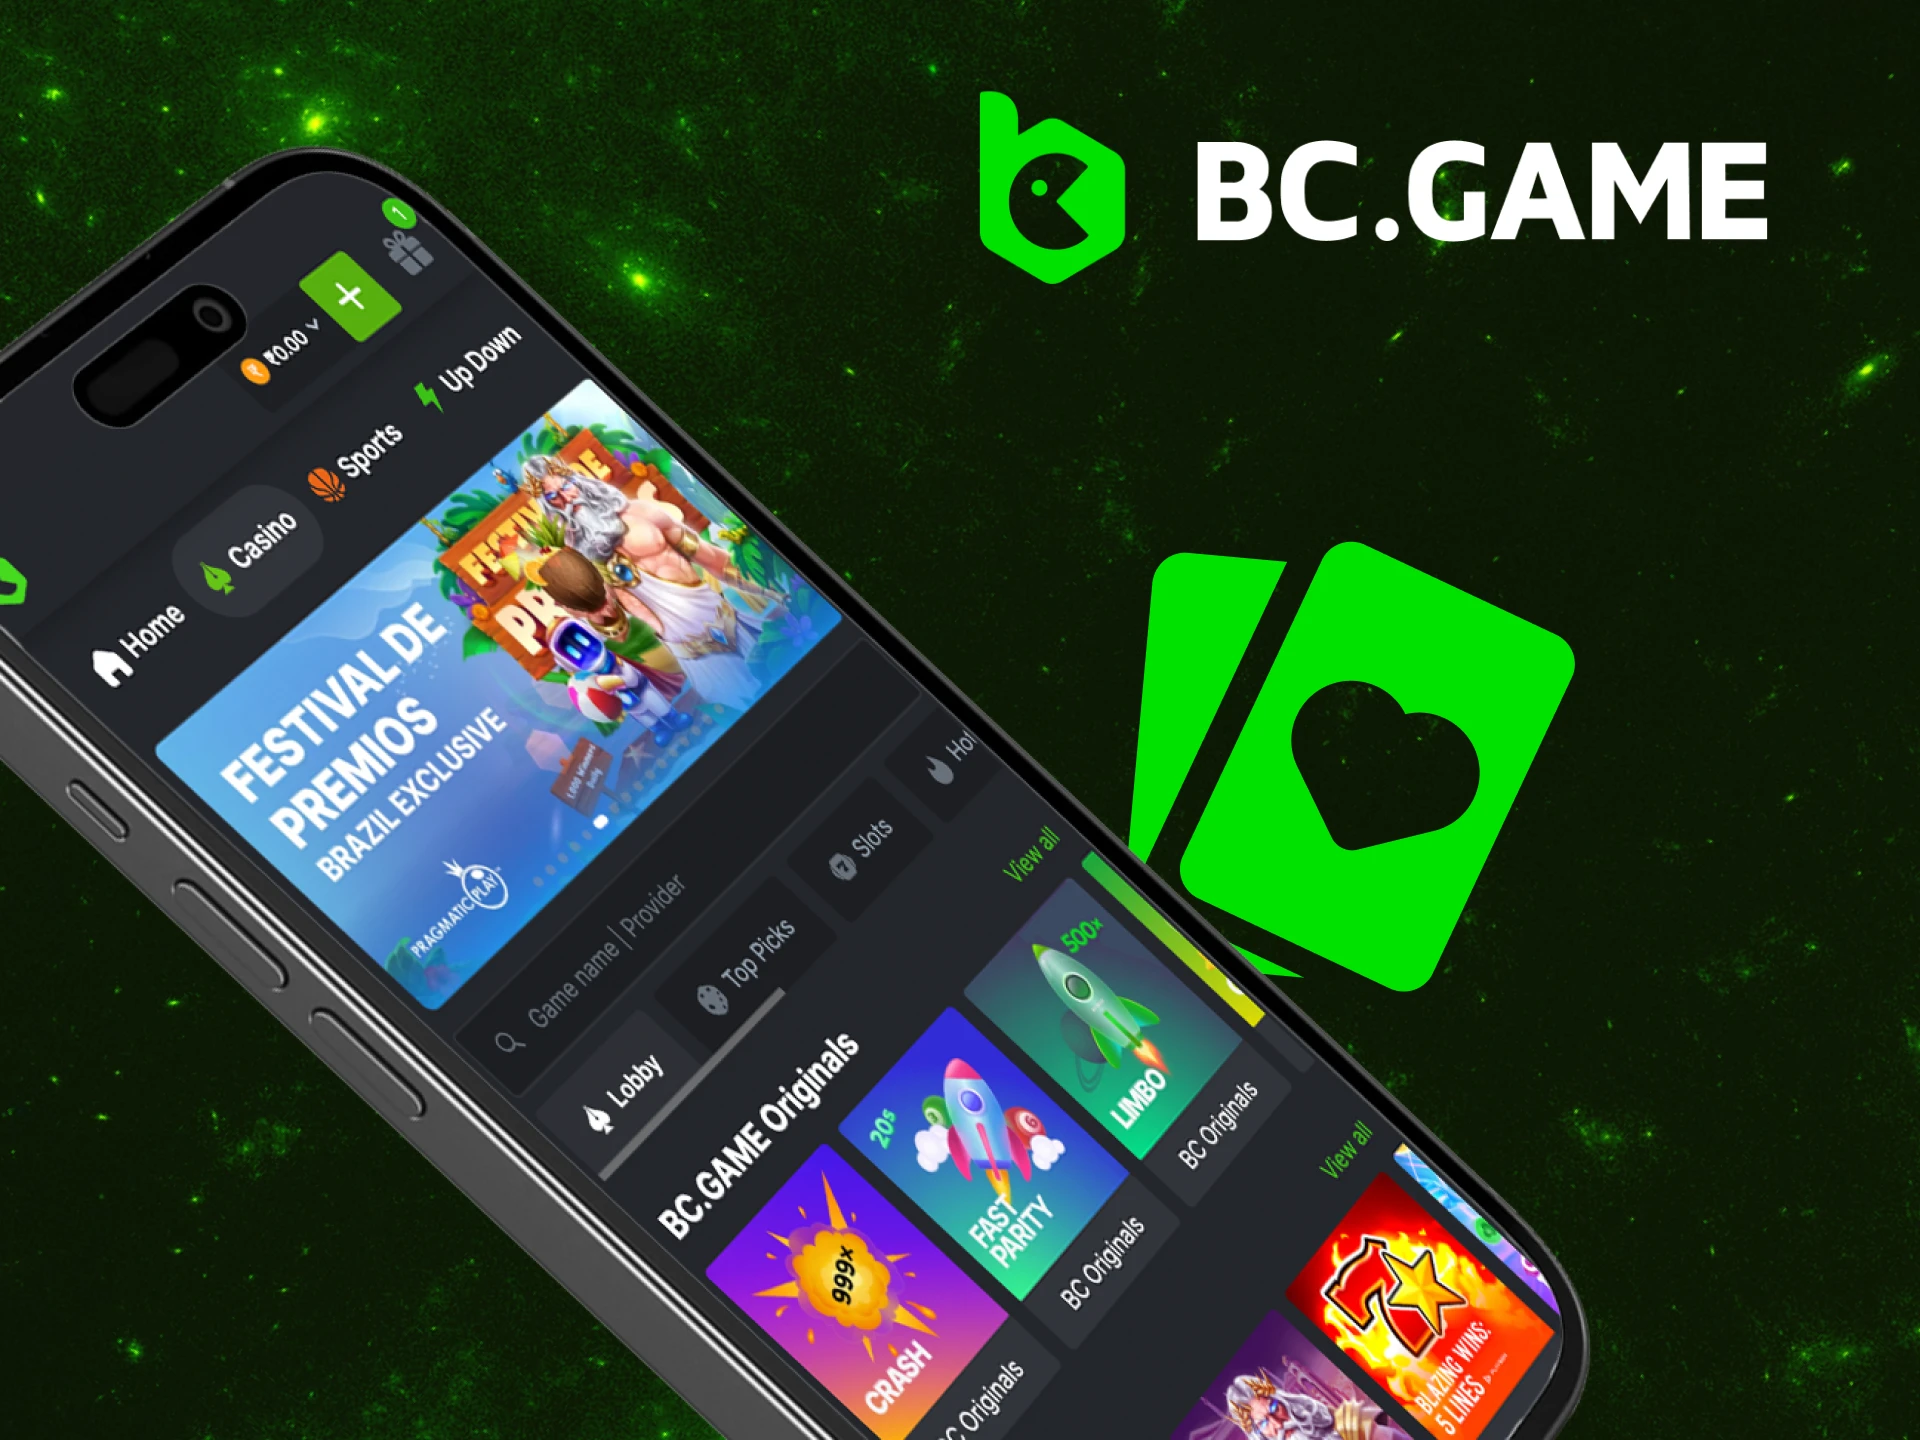 Play online casino games in the BC Game app.